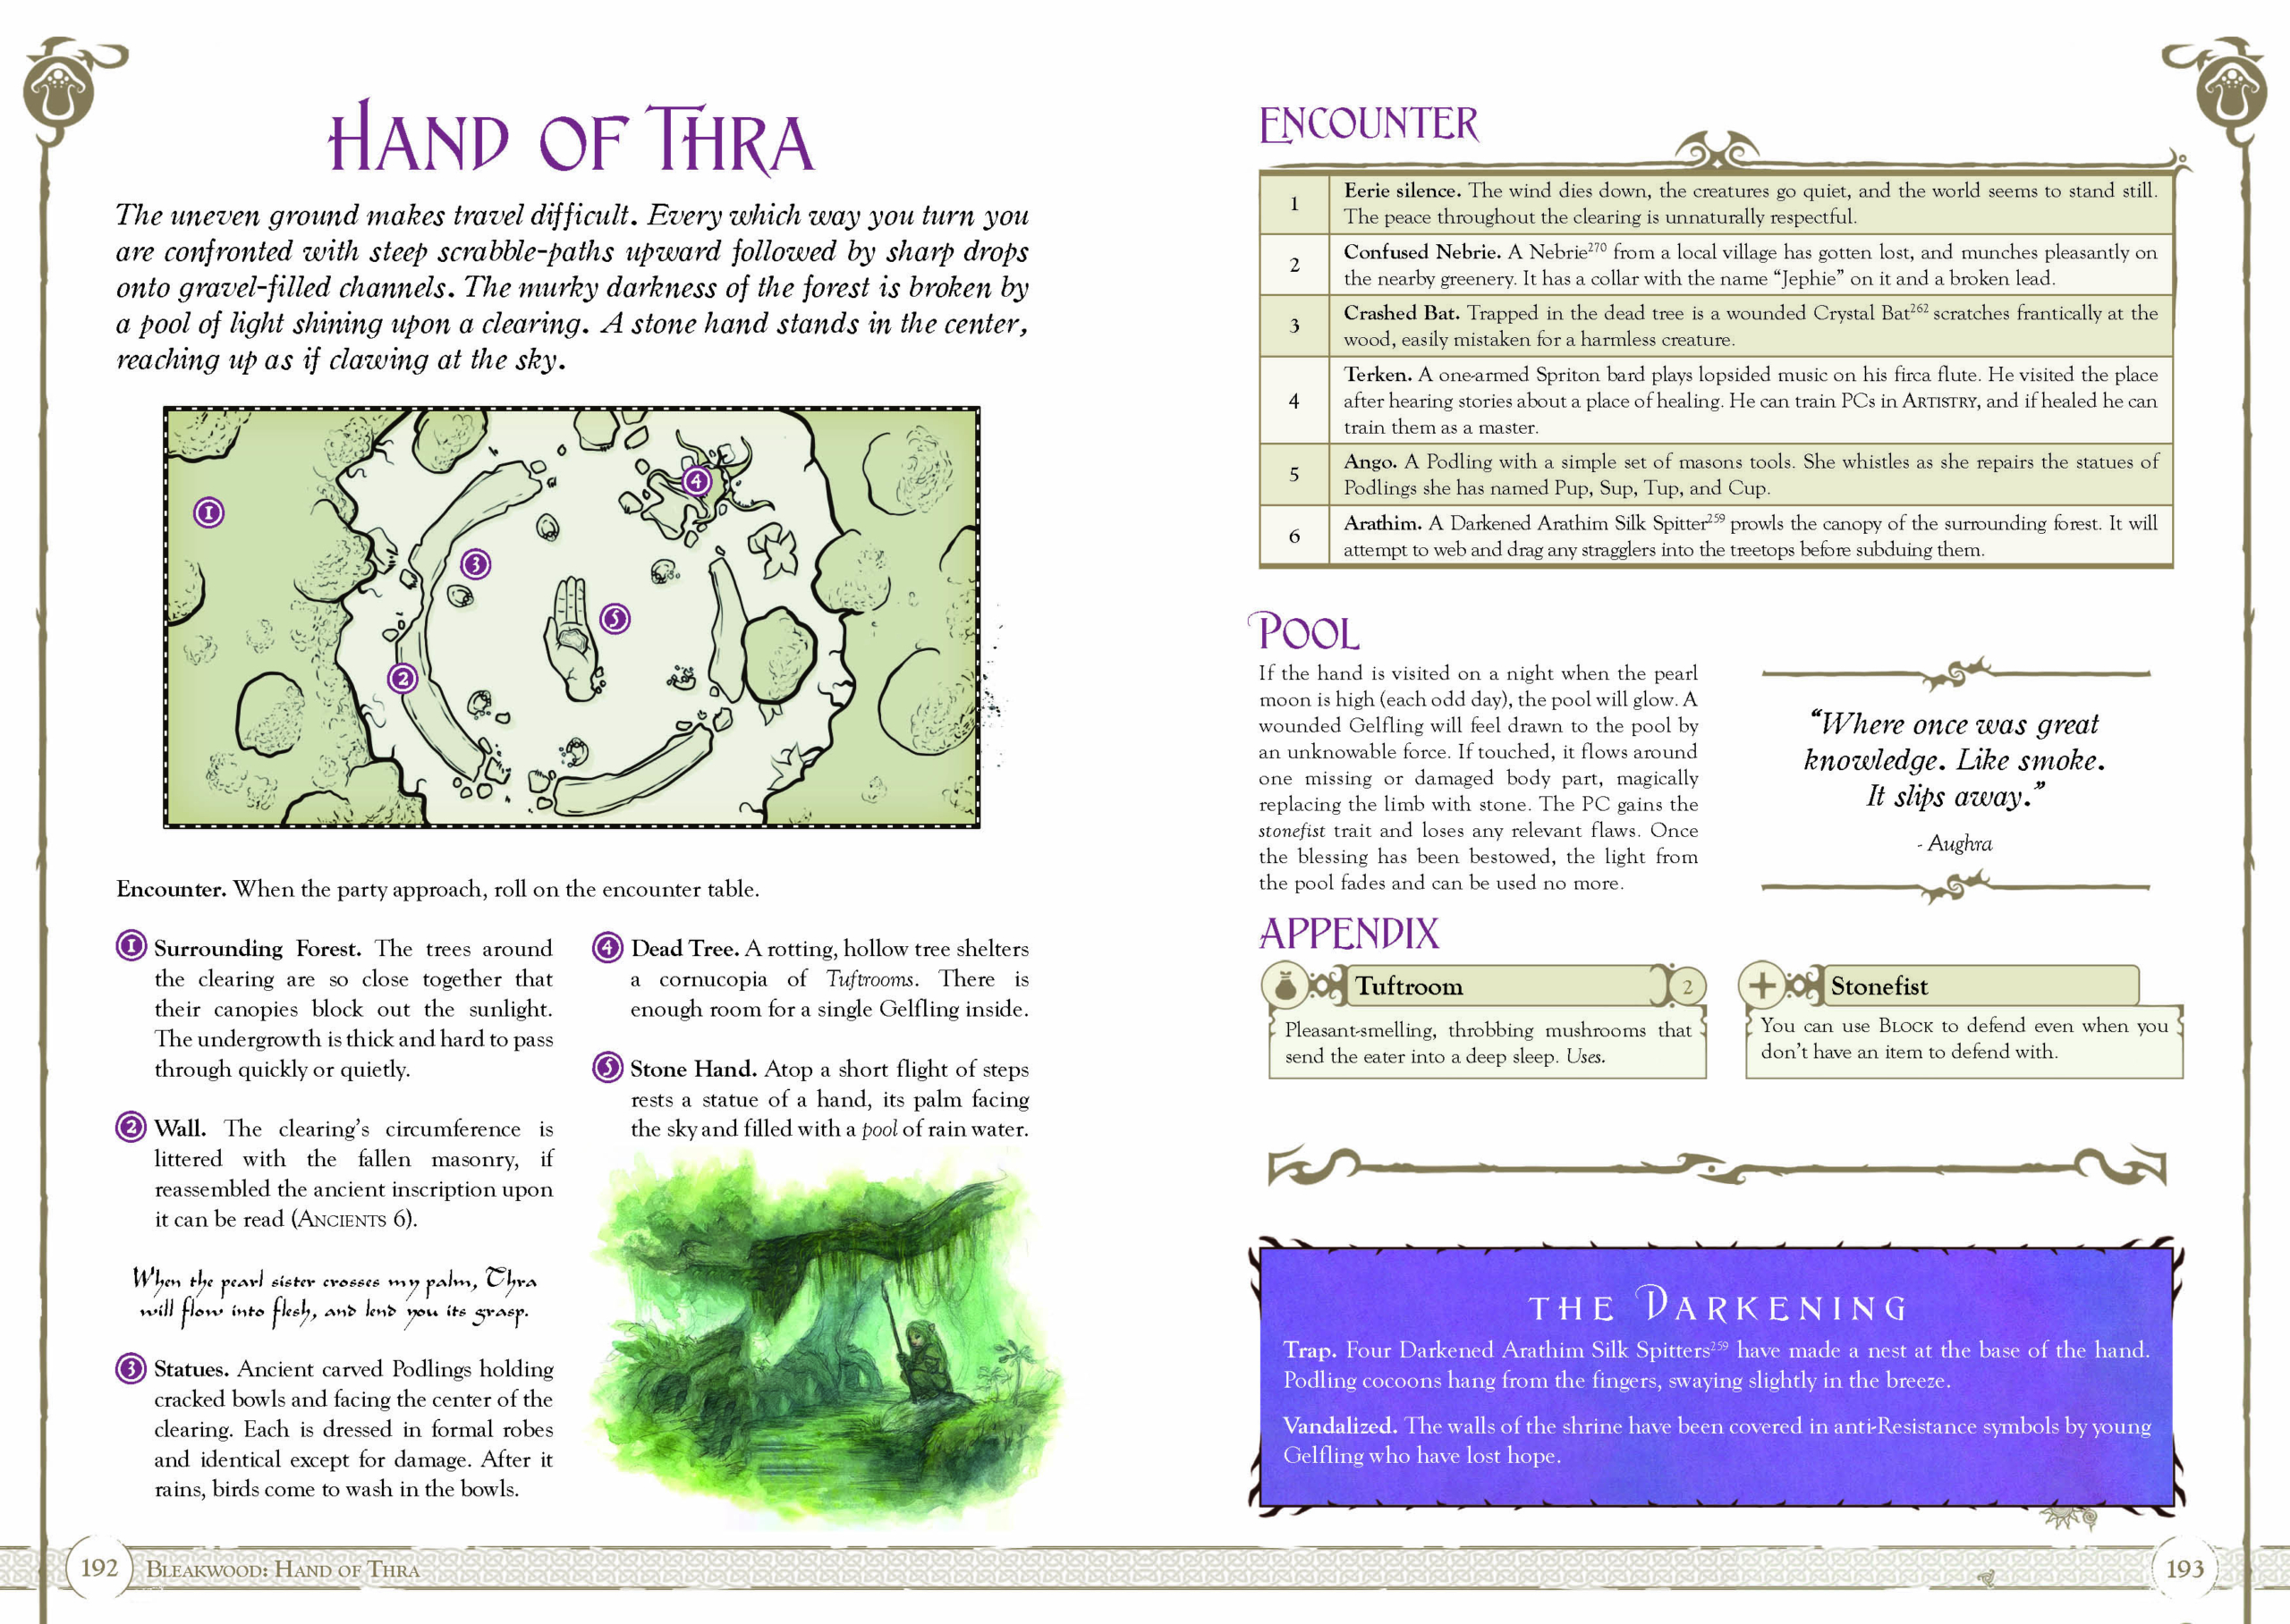 The Dark Crystal Hand Of Thra - River Horse